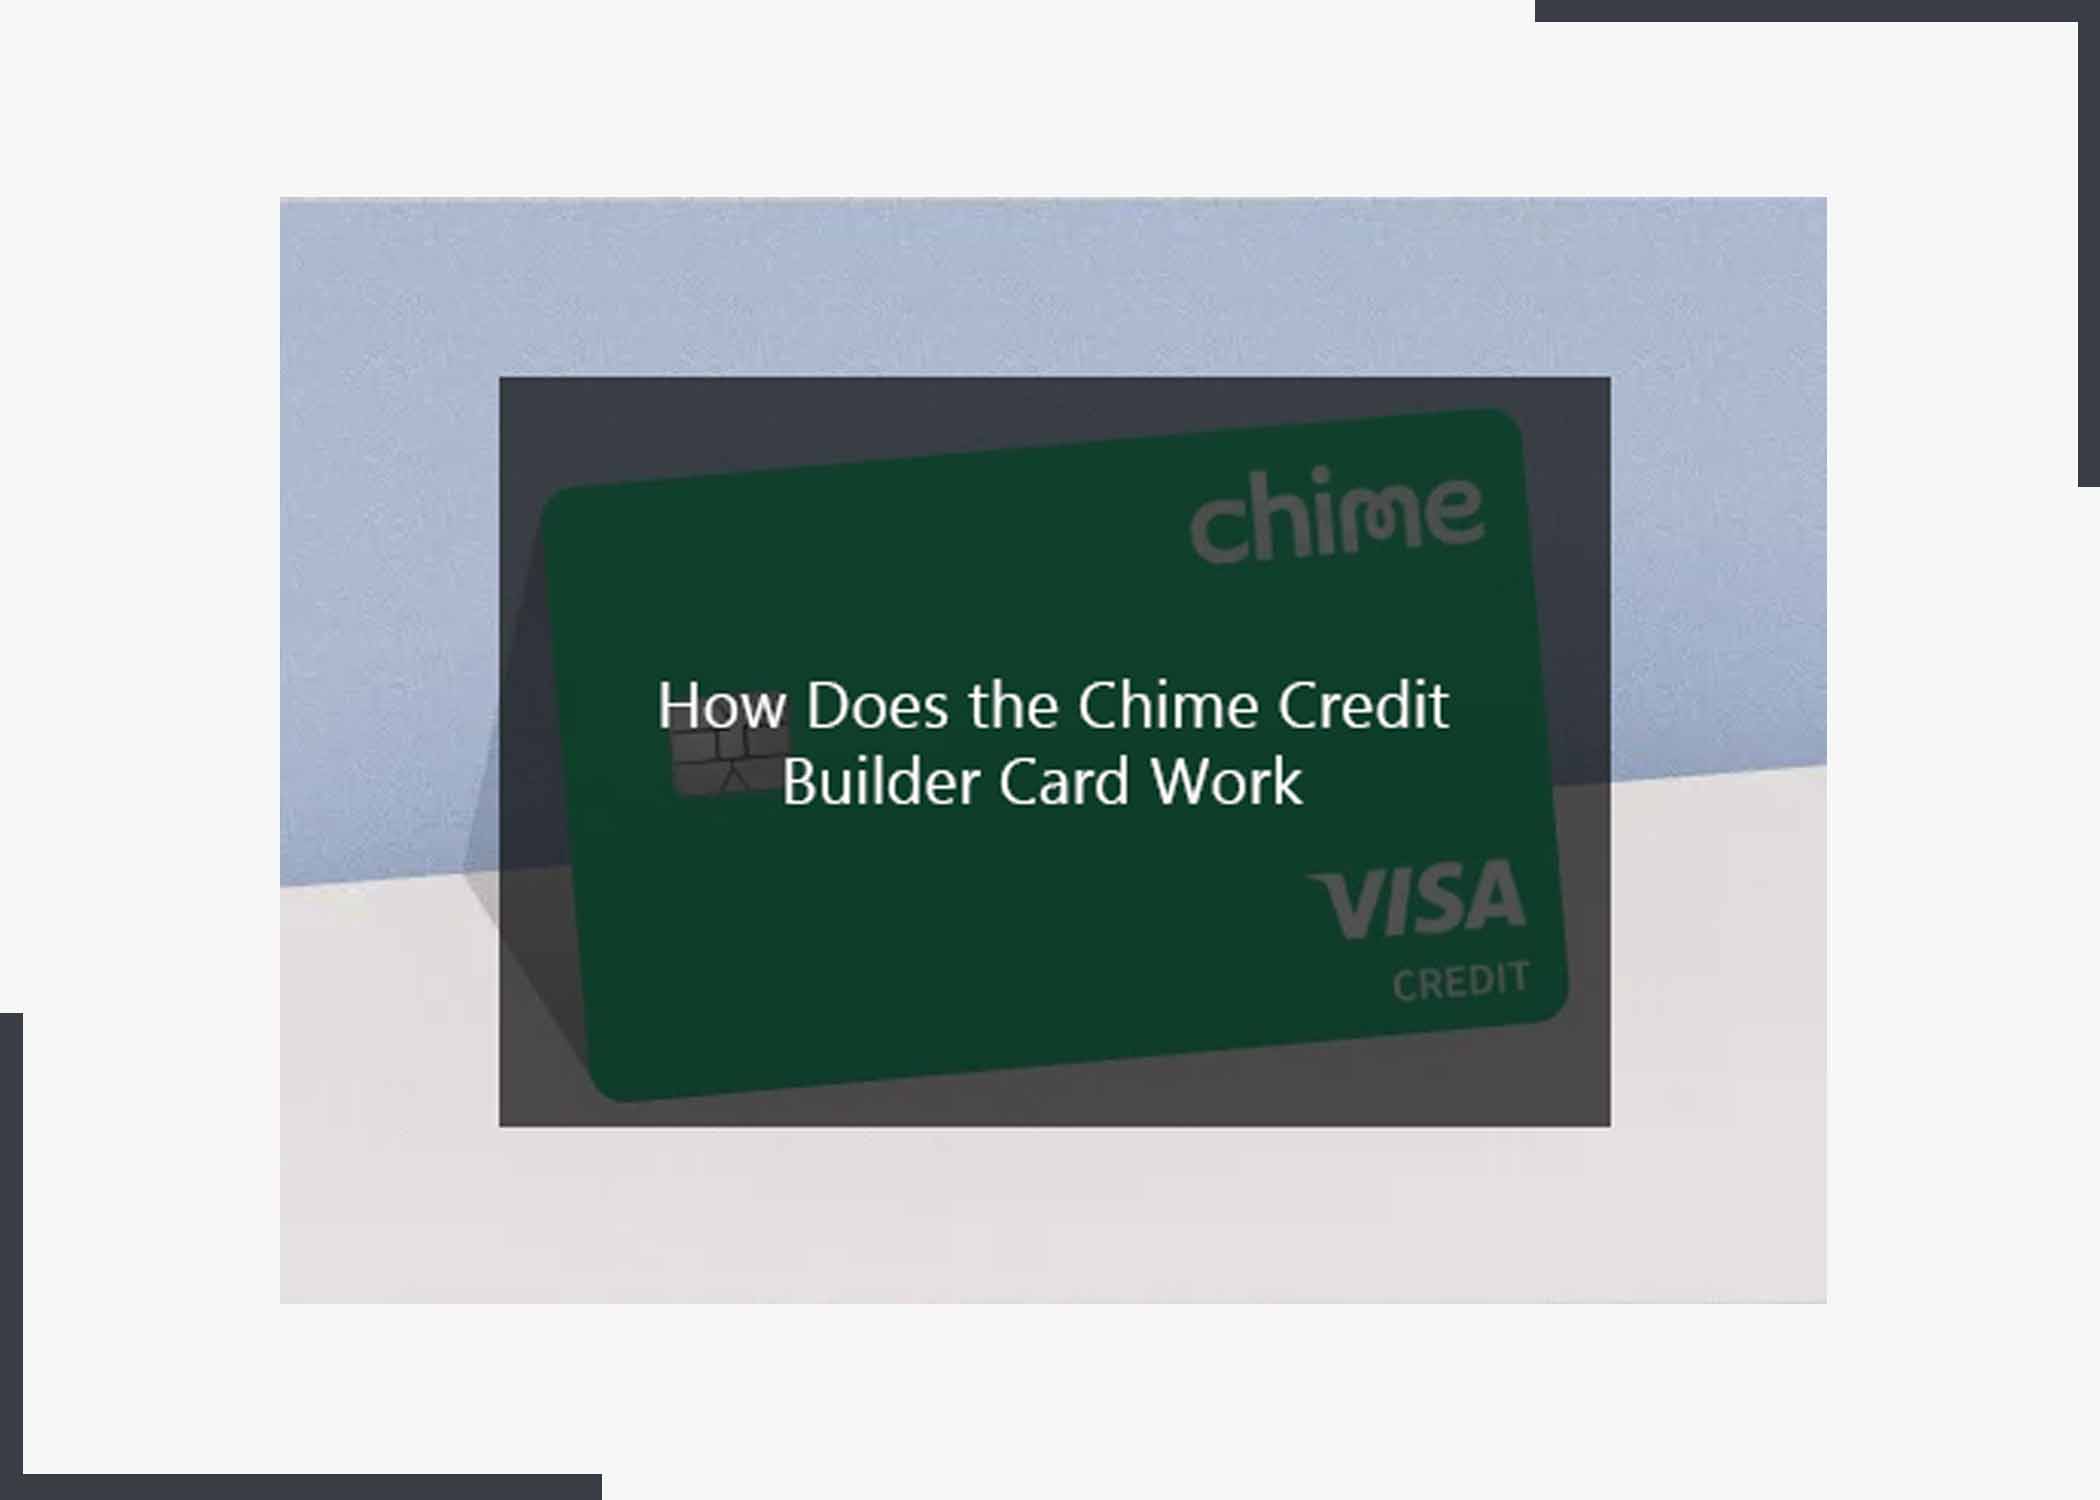 How Does the Chime Credit Builder Card Work